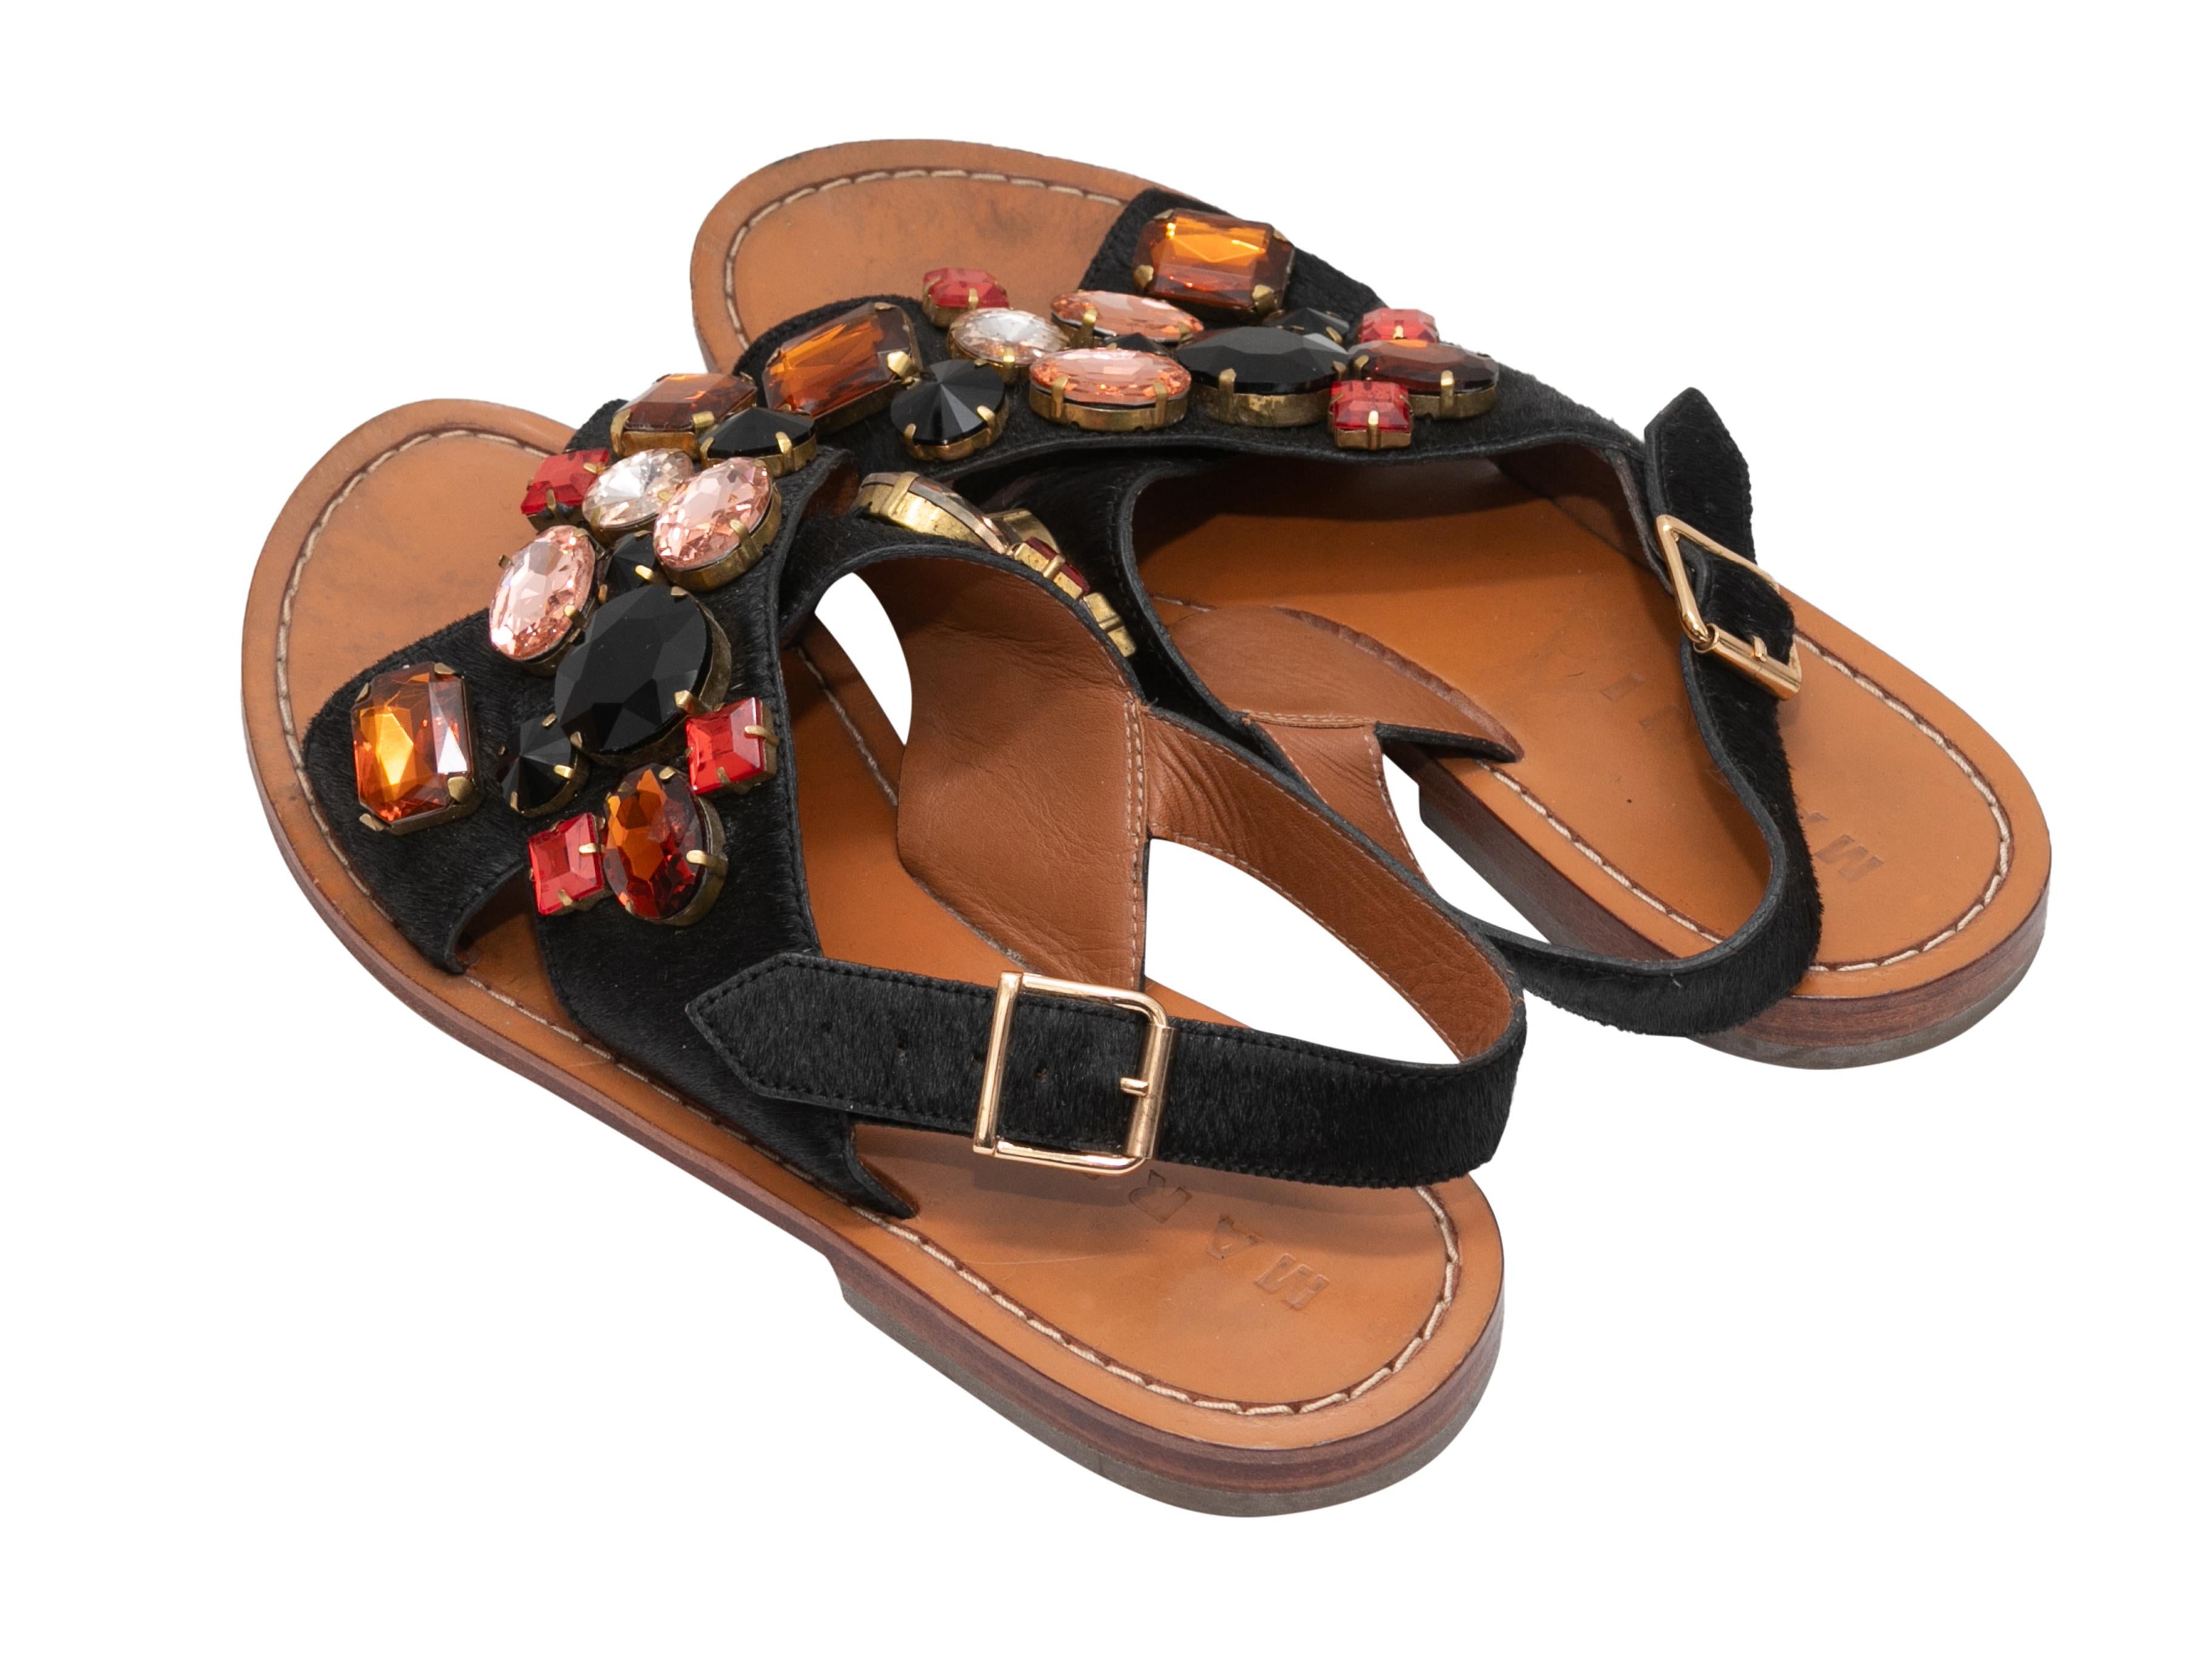 Black & Multicolor Marni Ponyhair Rhinestone-Embellished Sandals Size 37.5 In Good Condition For Sale In New York, NY